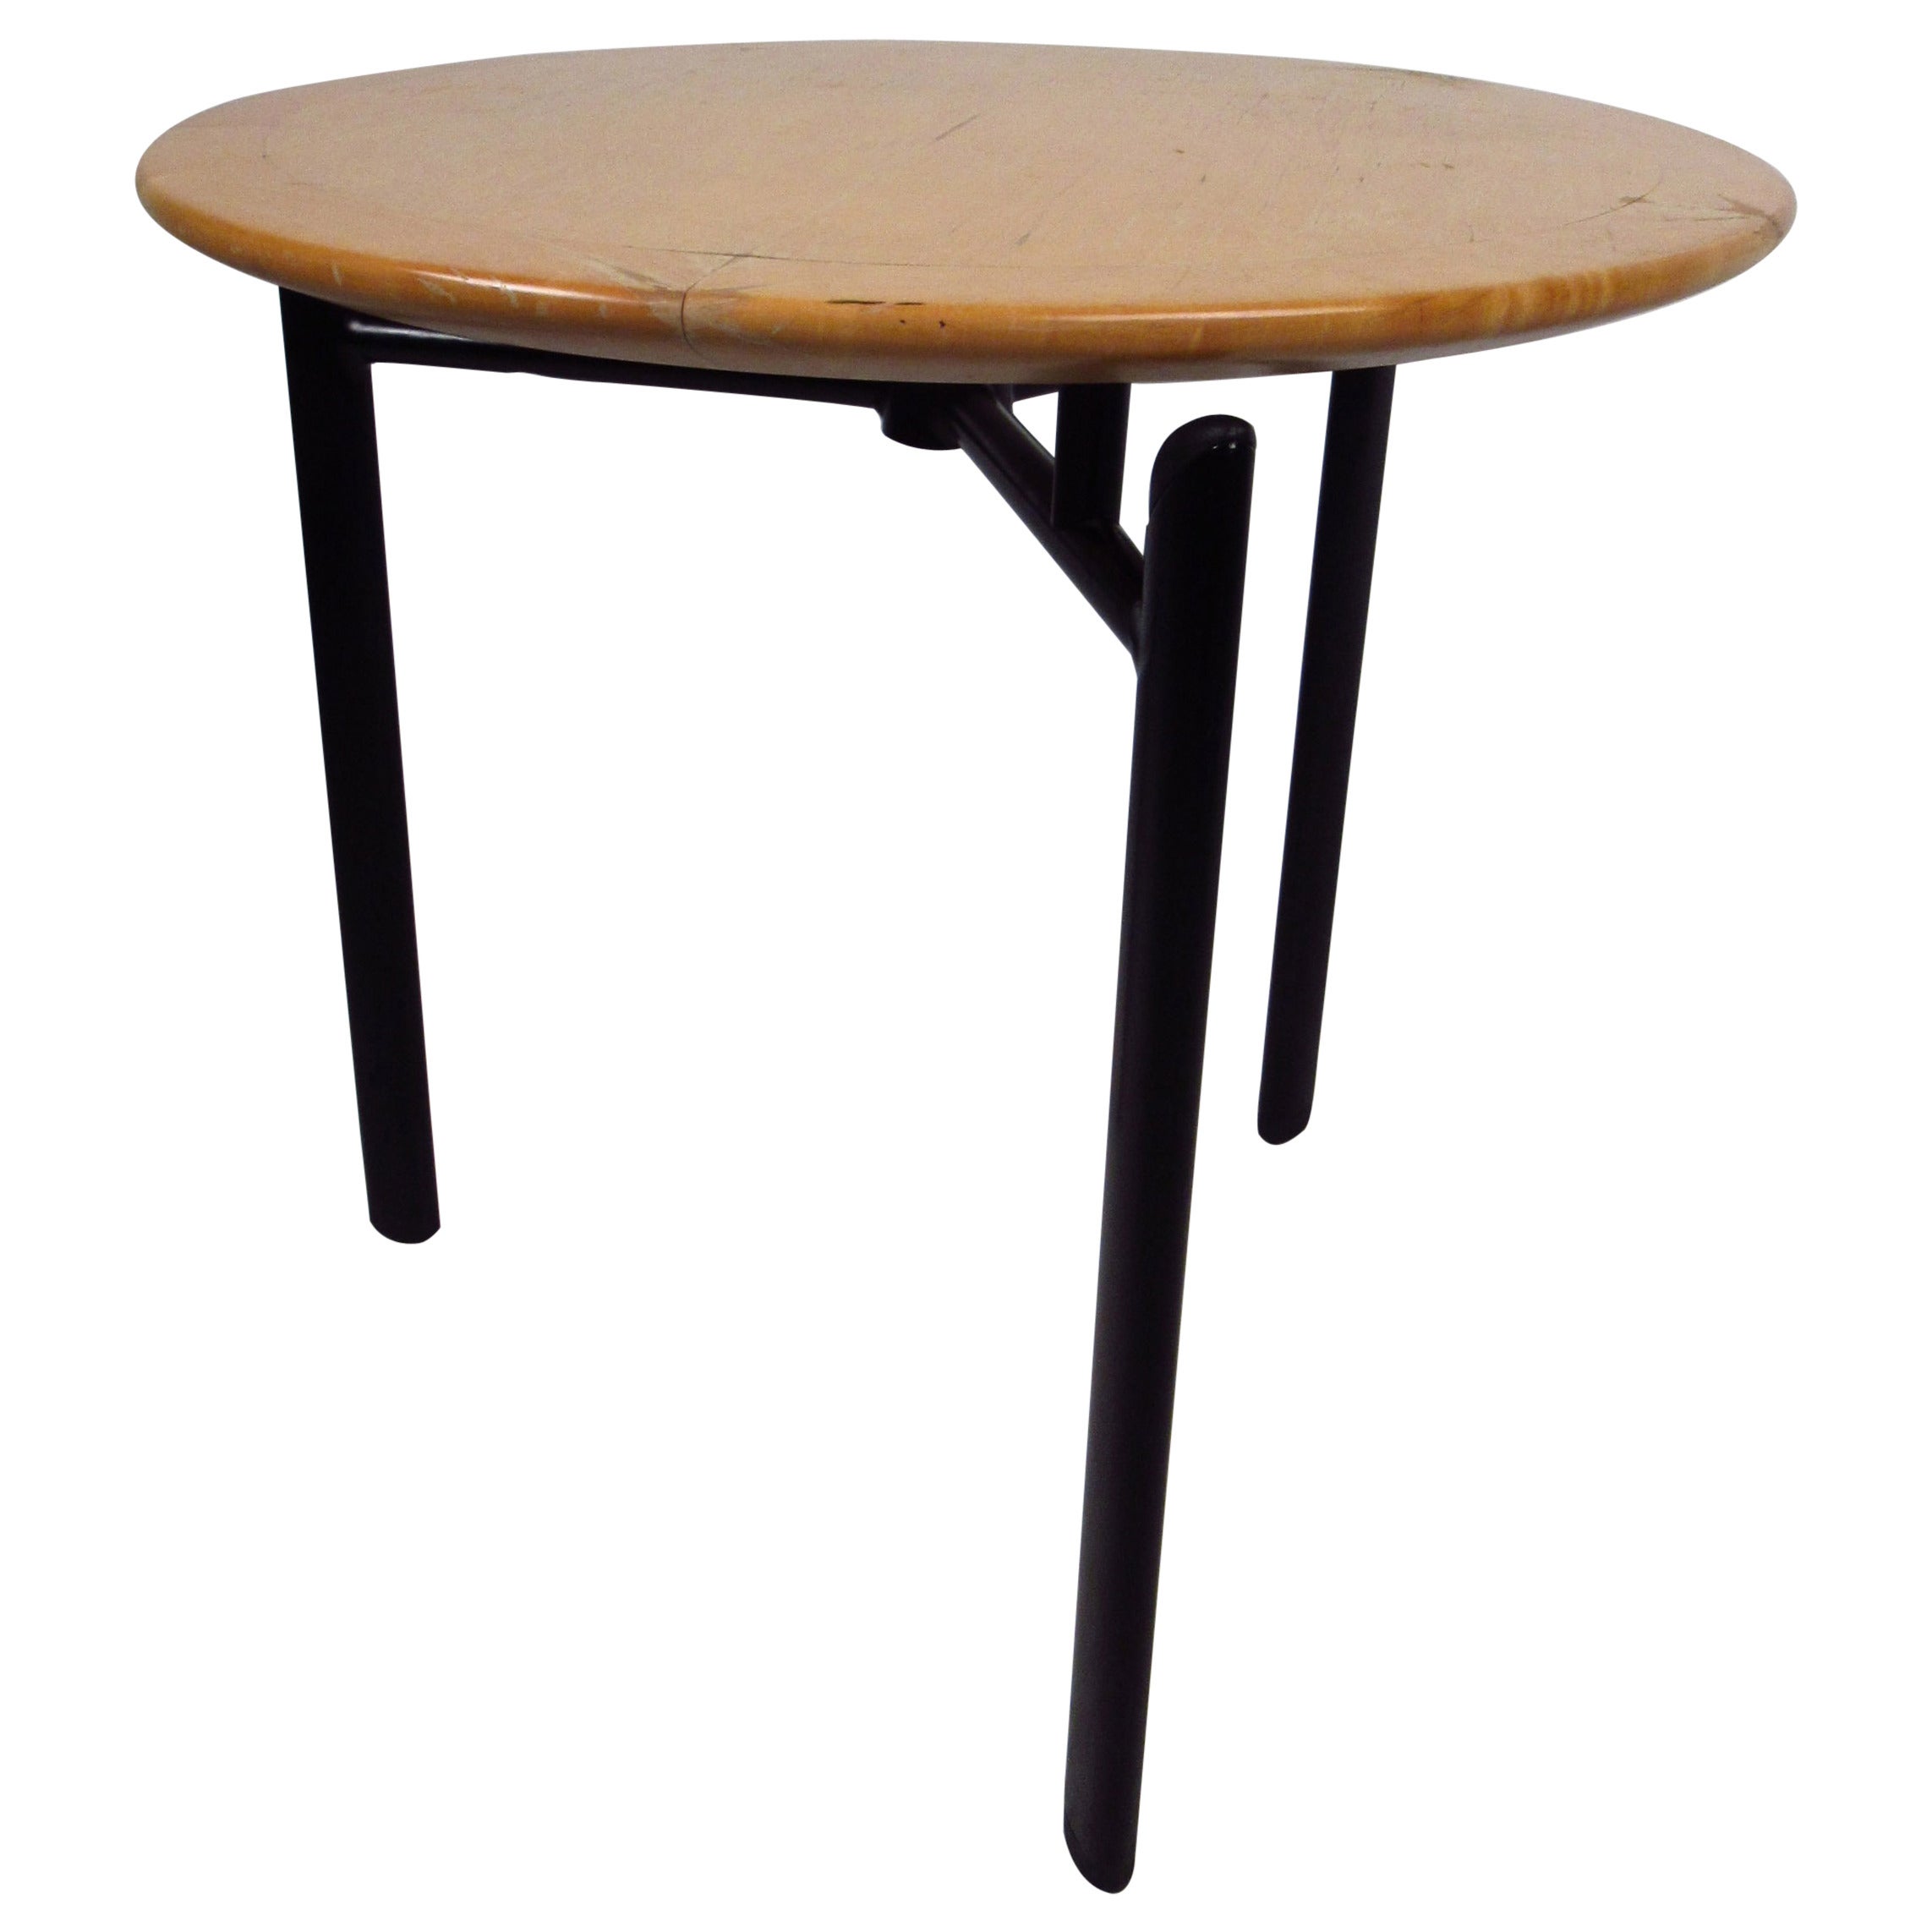 Round Canadian Maple Floating End Table by Haworth